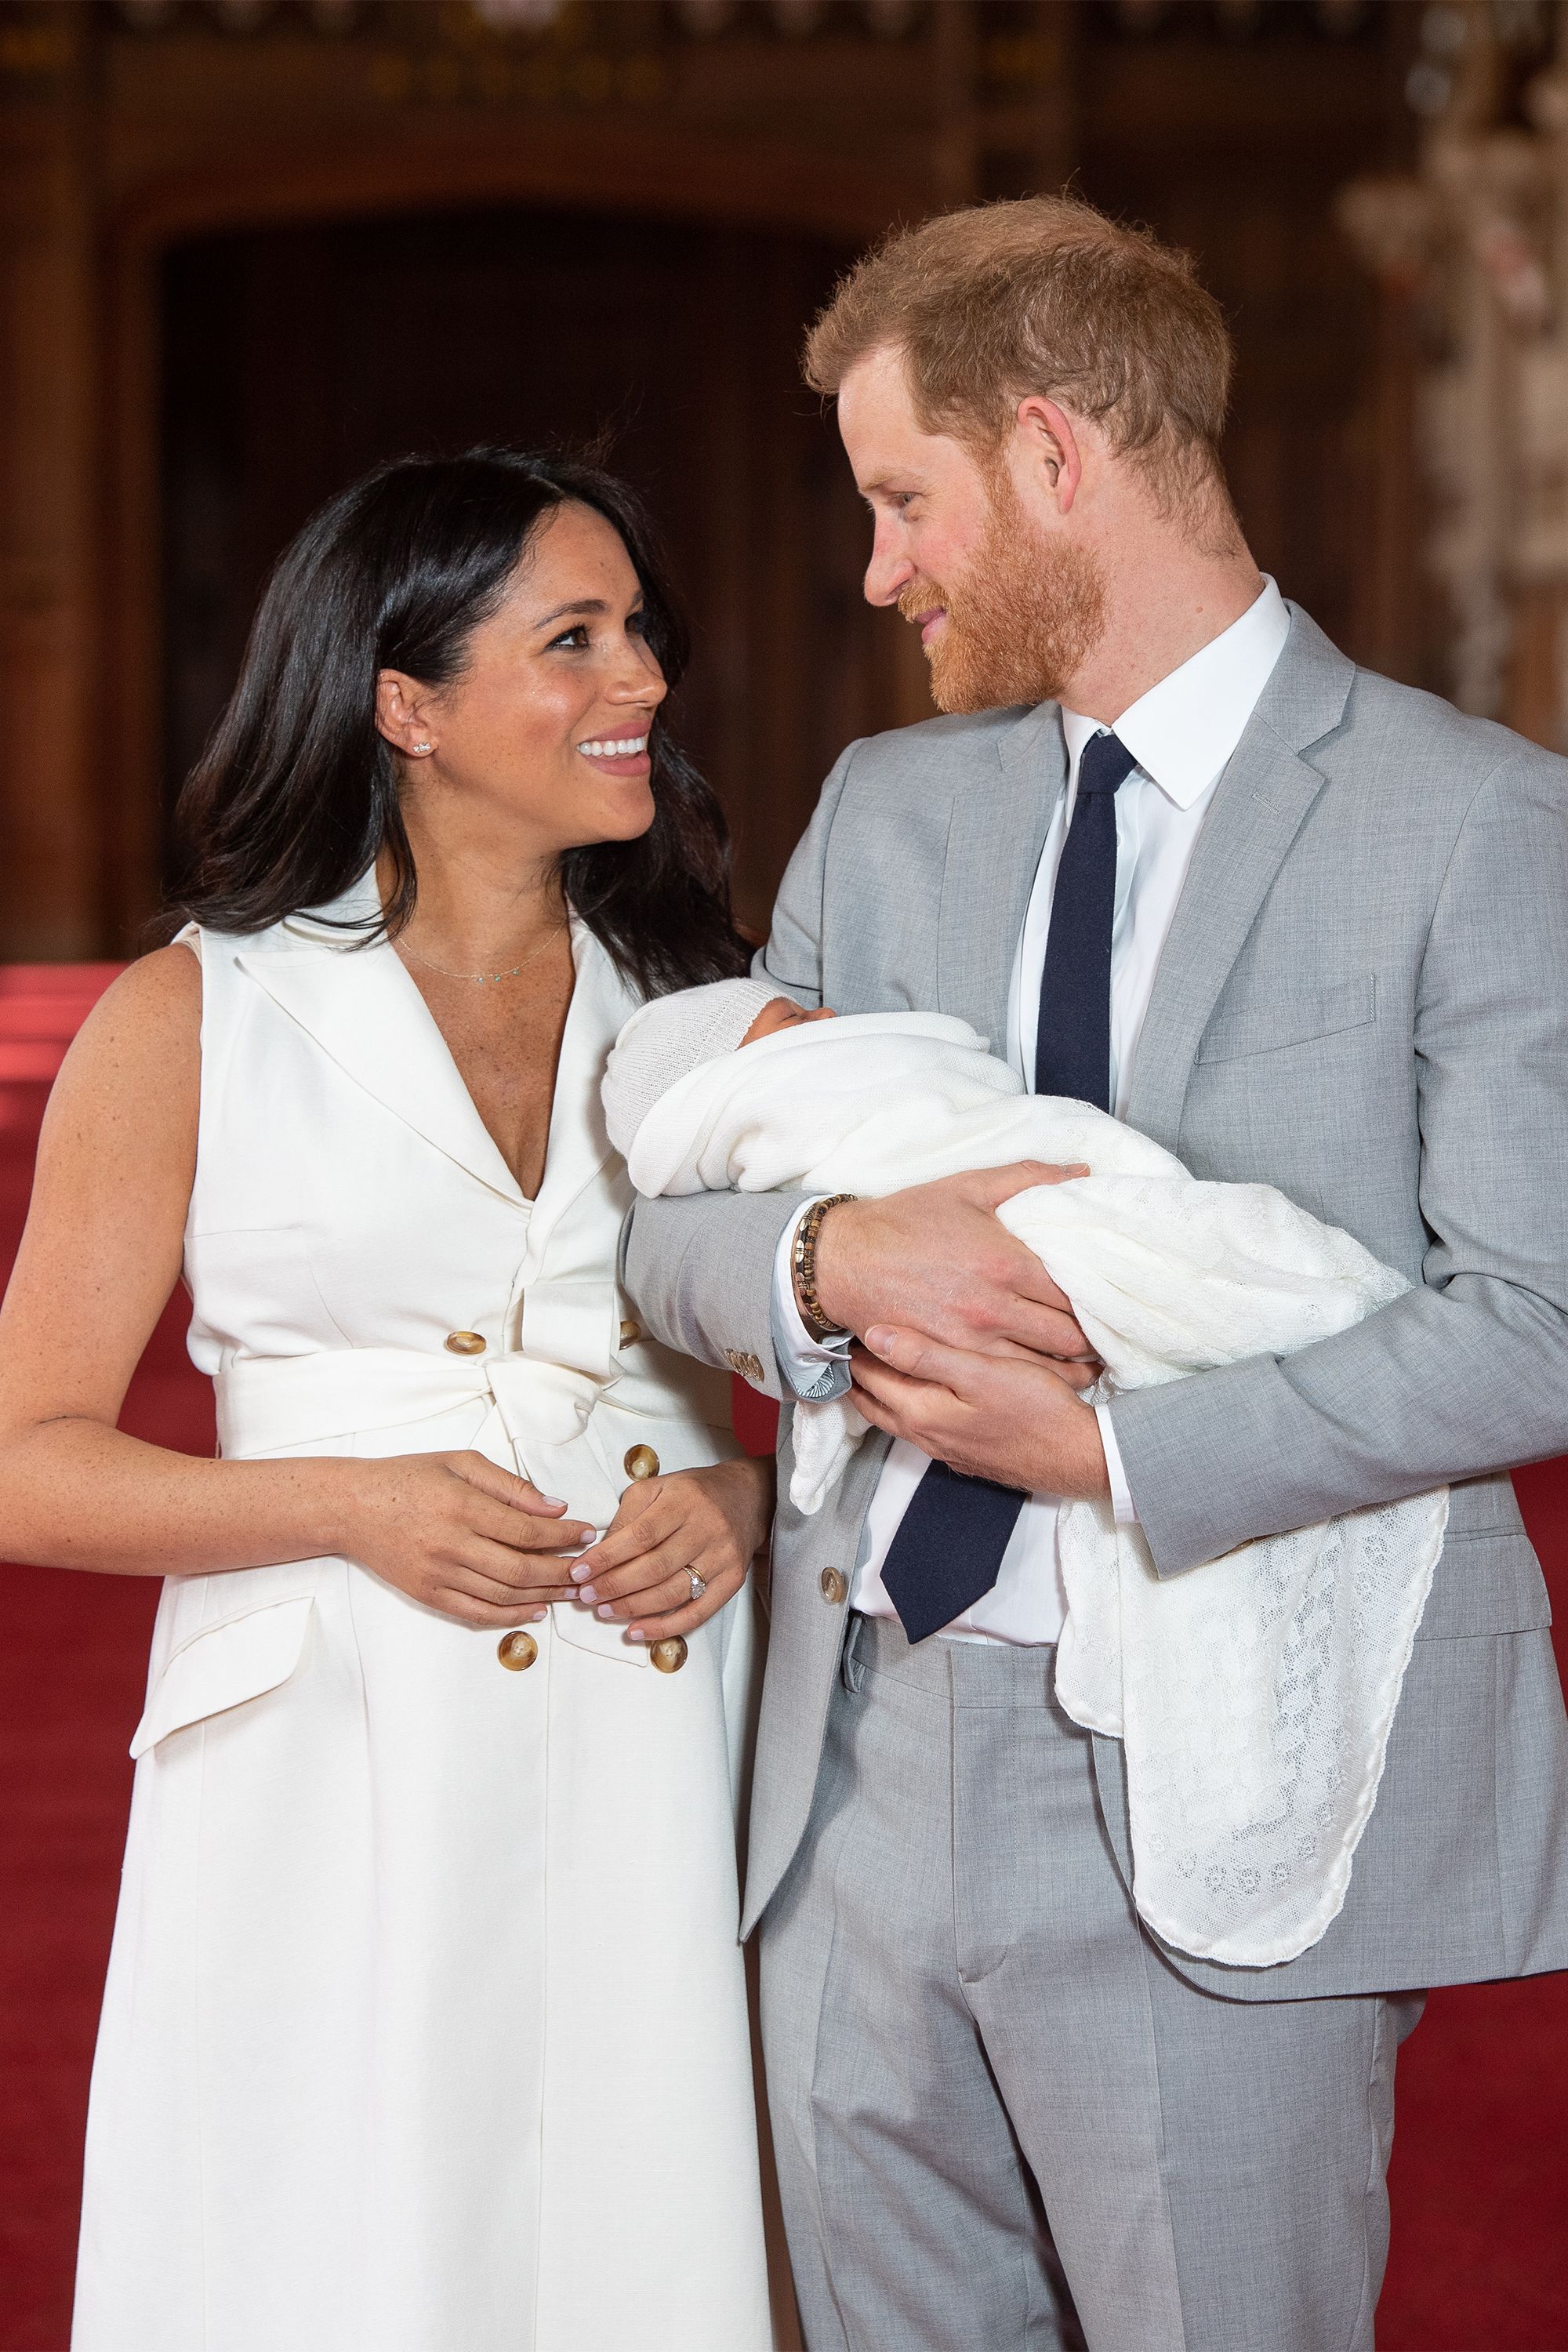 https://hips.hearstapps.com/hmg-prod.s3.amazonaws.com/images/hbz-prince-harry-meghan-markle-cute-moments-2019-05-gettyimages-1142167985.jpg?crop=1xw:1xh;center,top